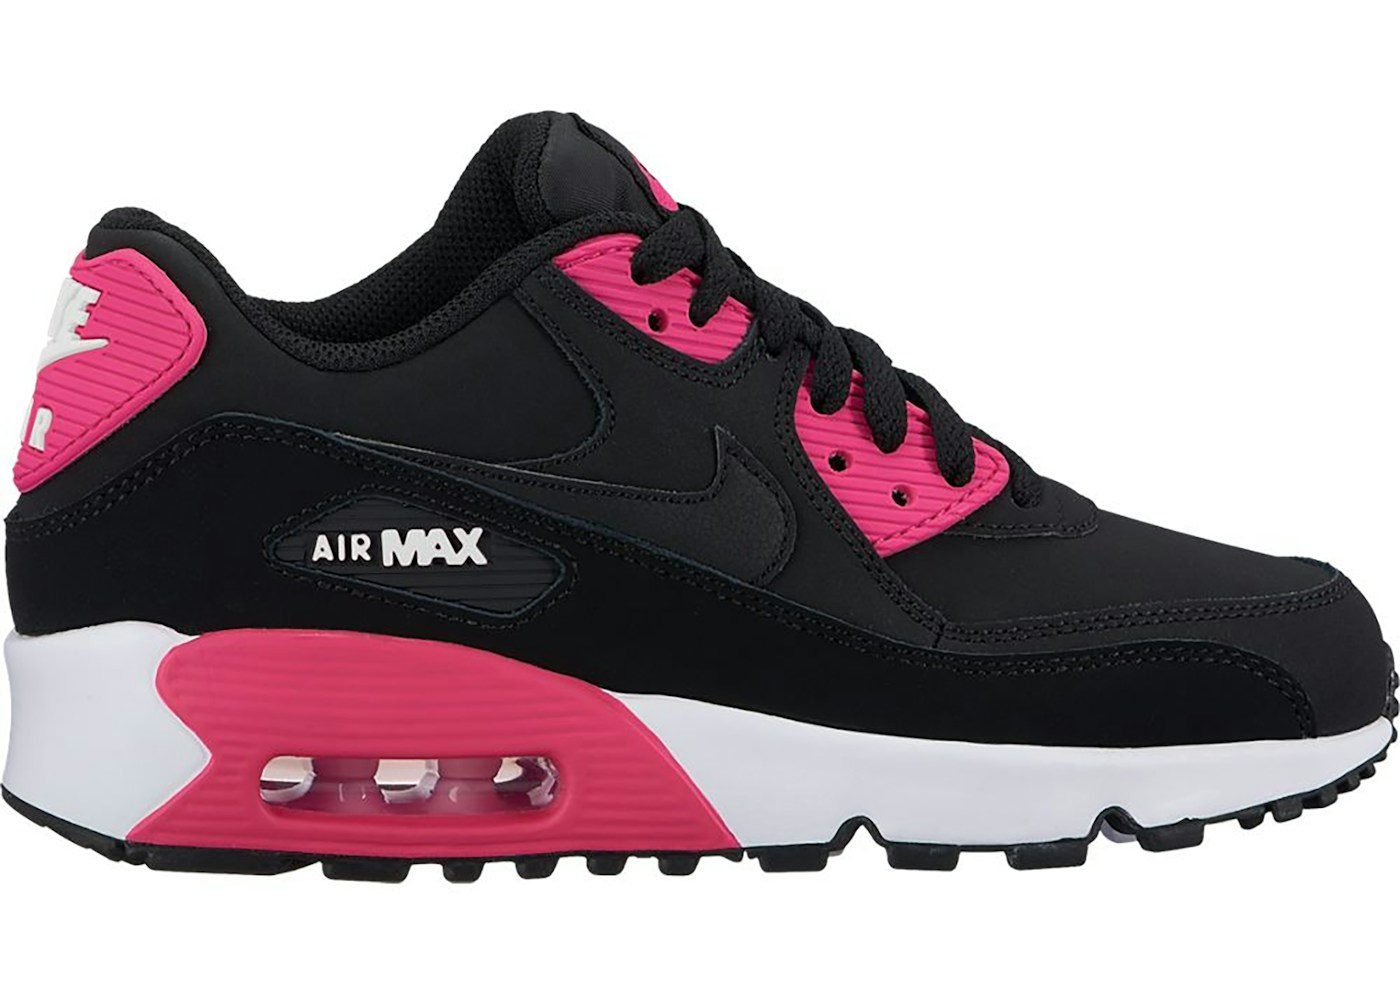 Nike Air Max 90 Leather Black Pink Prime (GS) - 833376-010